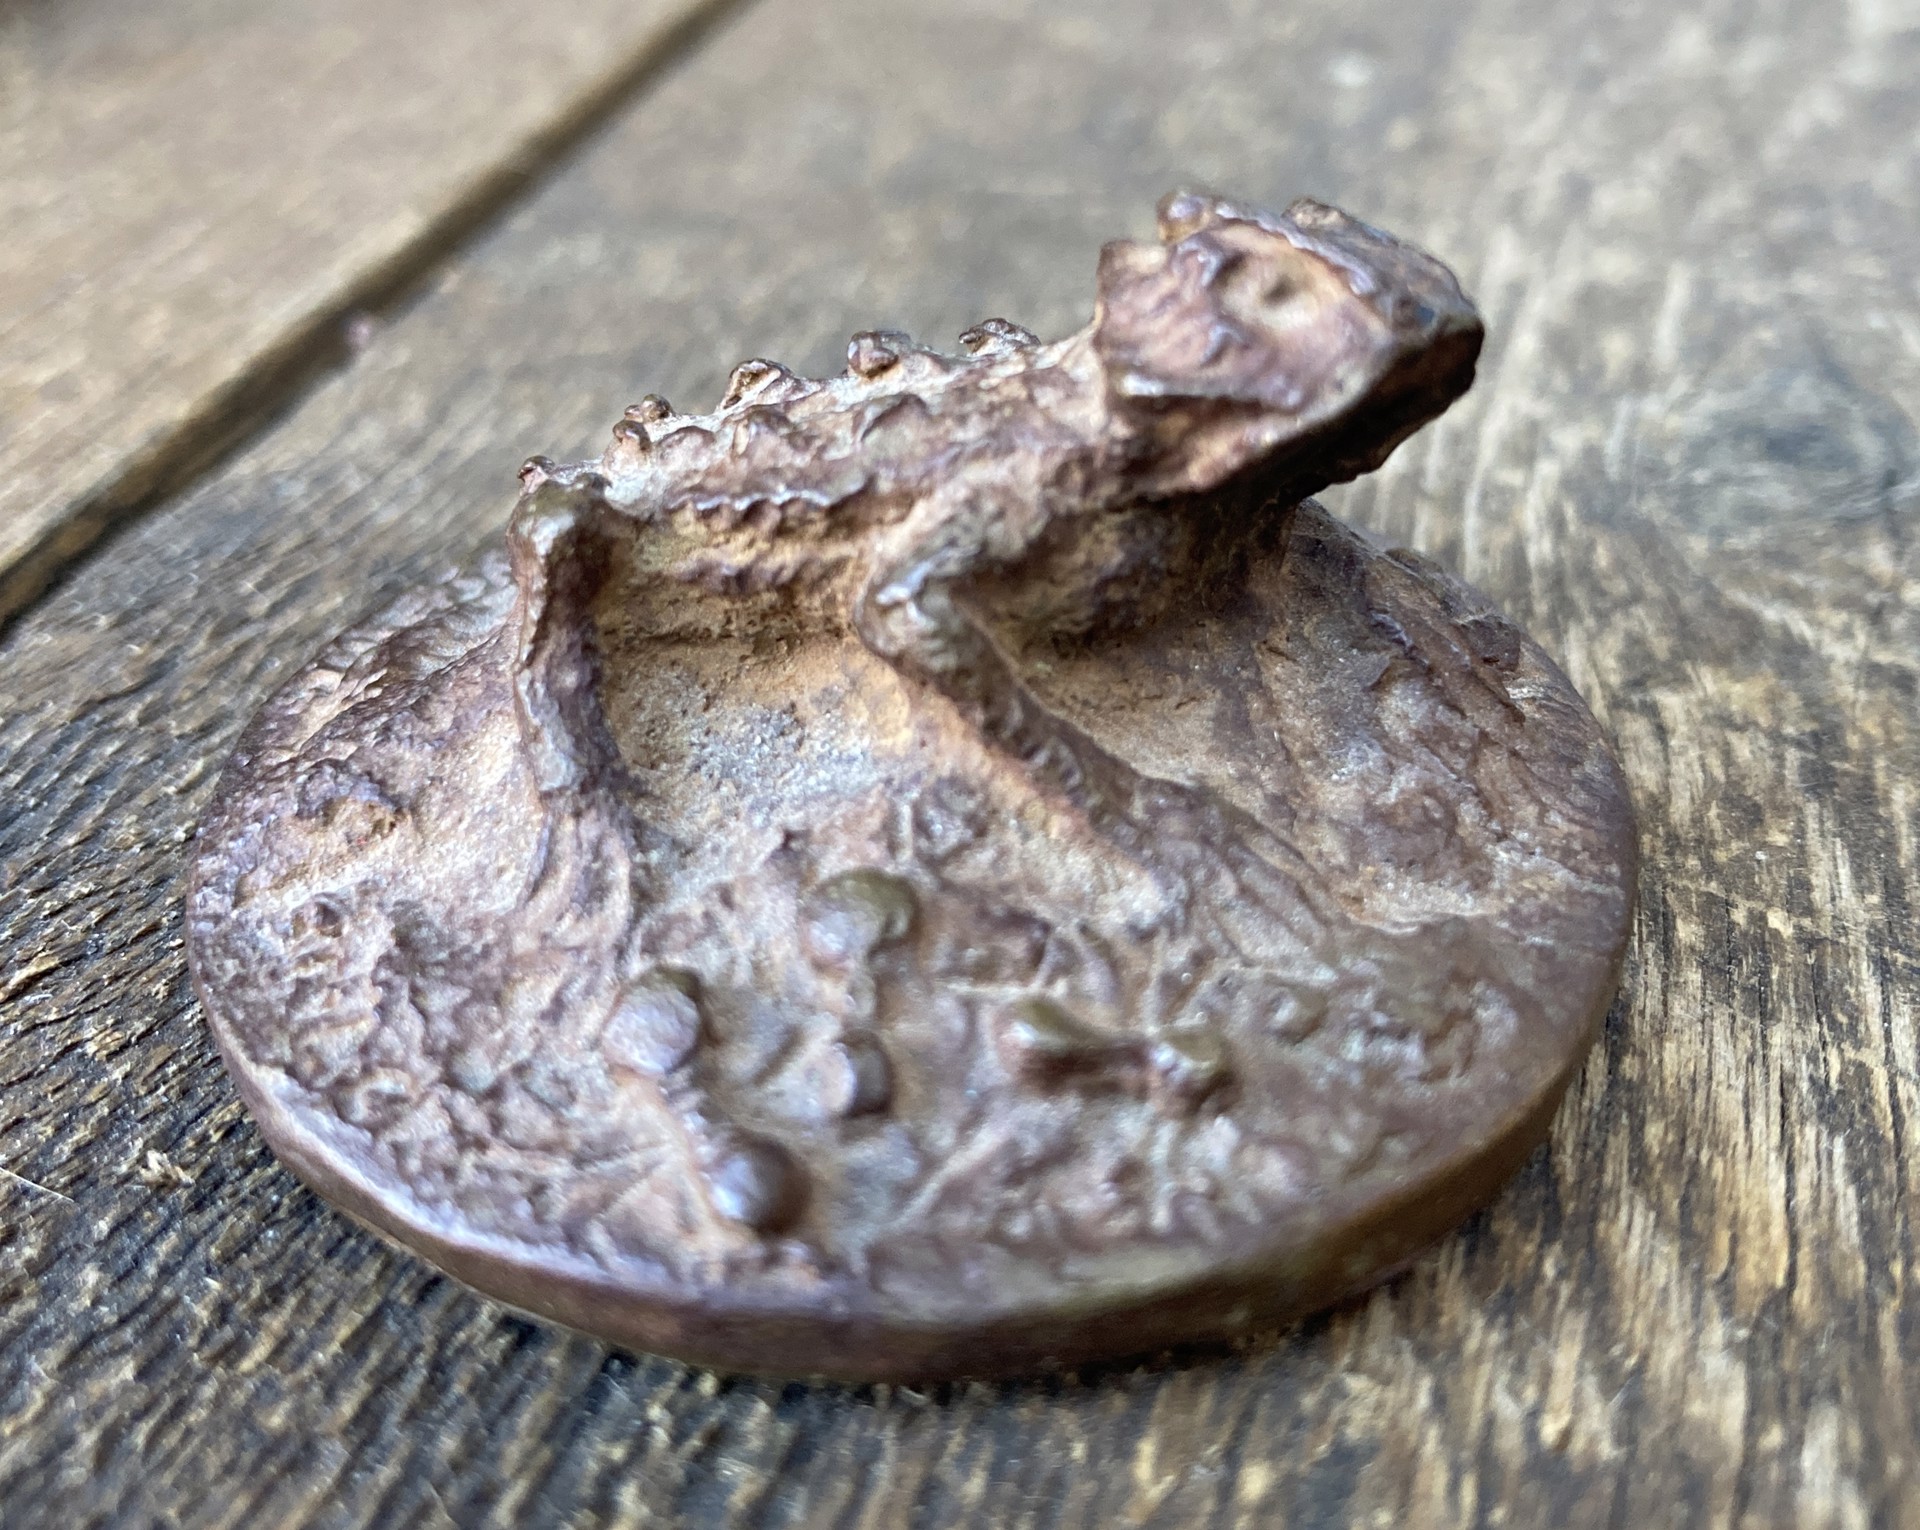 Tiny Horney Toad by Rob Pitzer's Private Collection